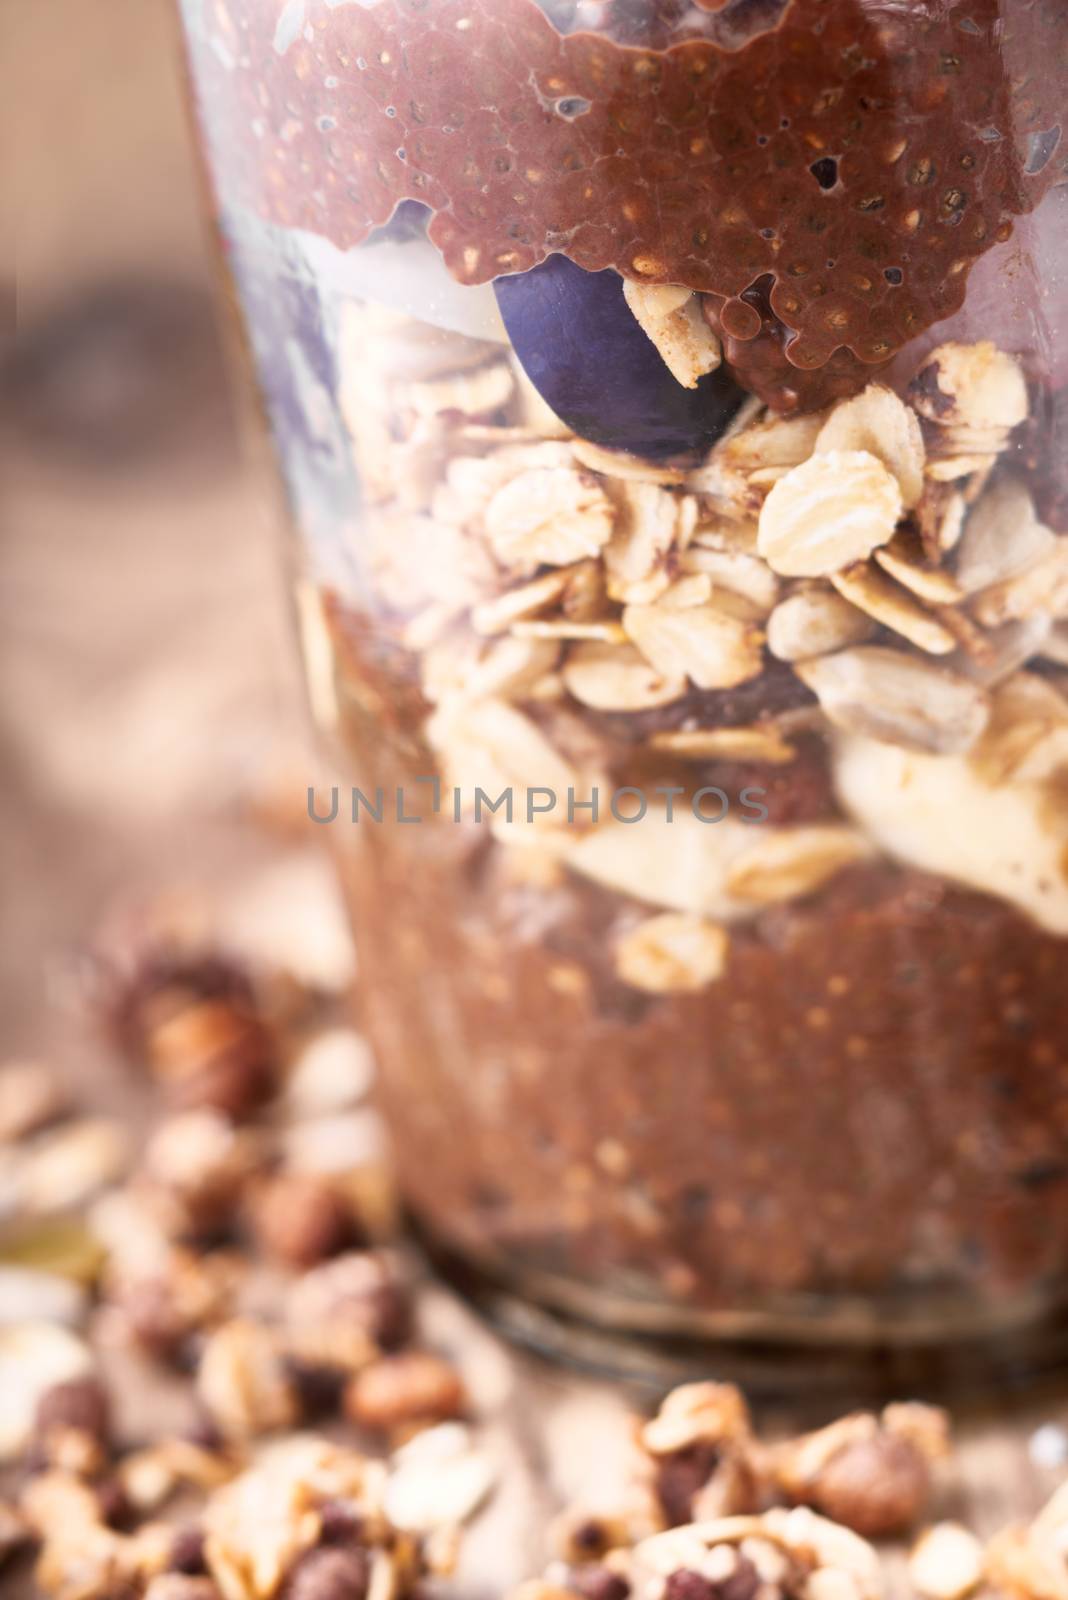 Chocolate chia pudding with oat flakes in the glass jar by Deniskarpenkov